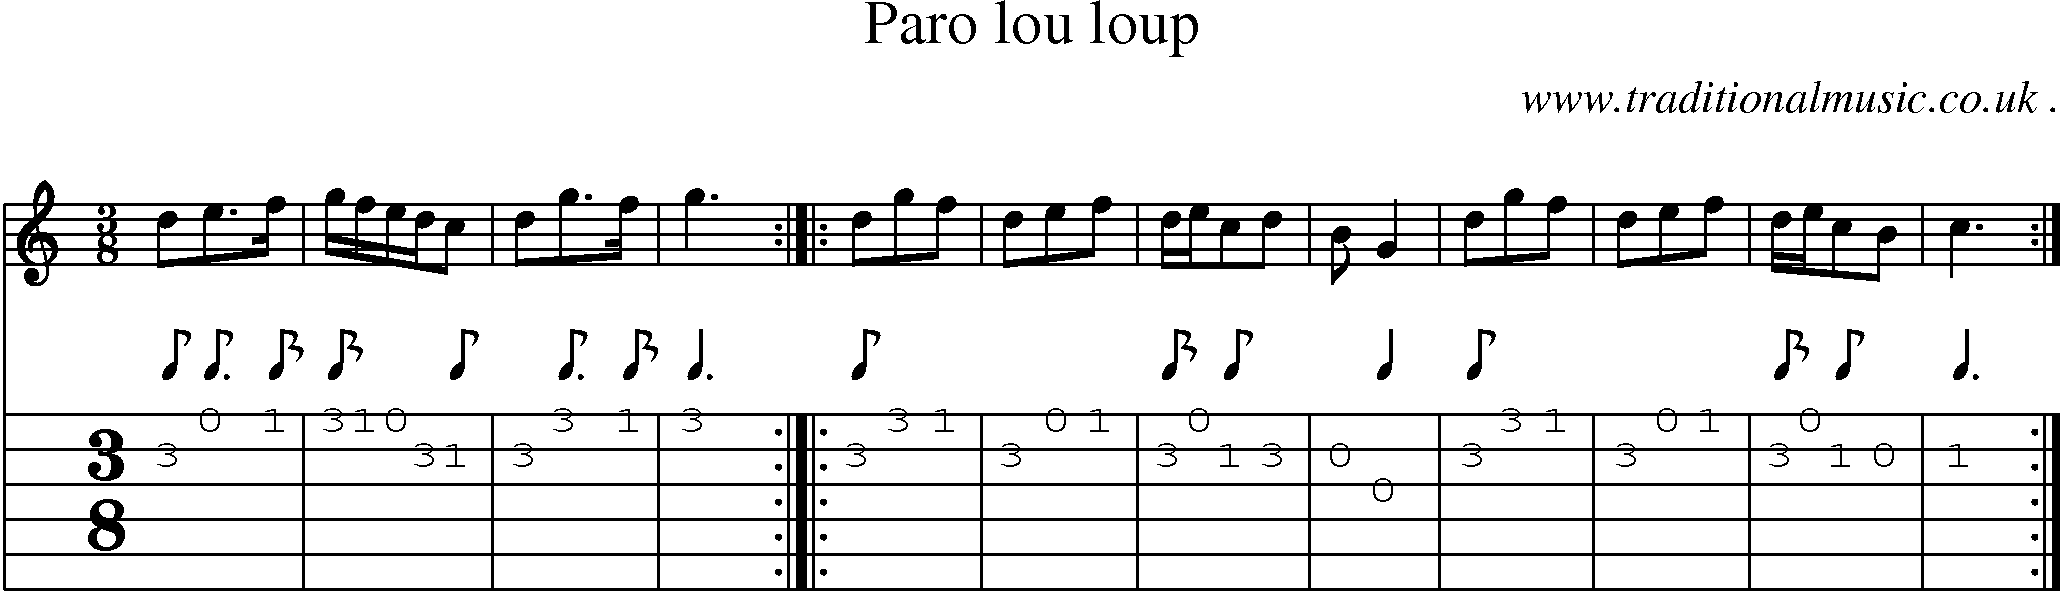 Sheet-Music and Guitar Tabs for Paro Lou Loup